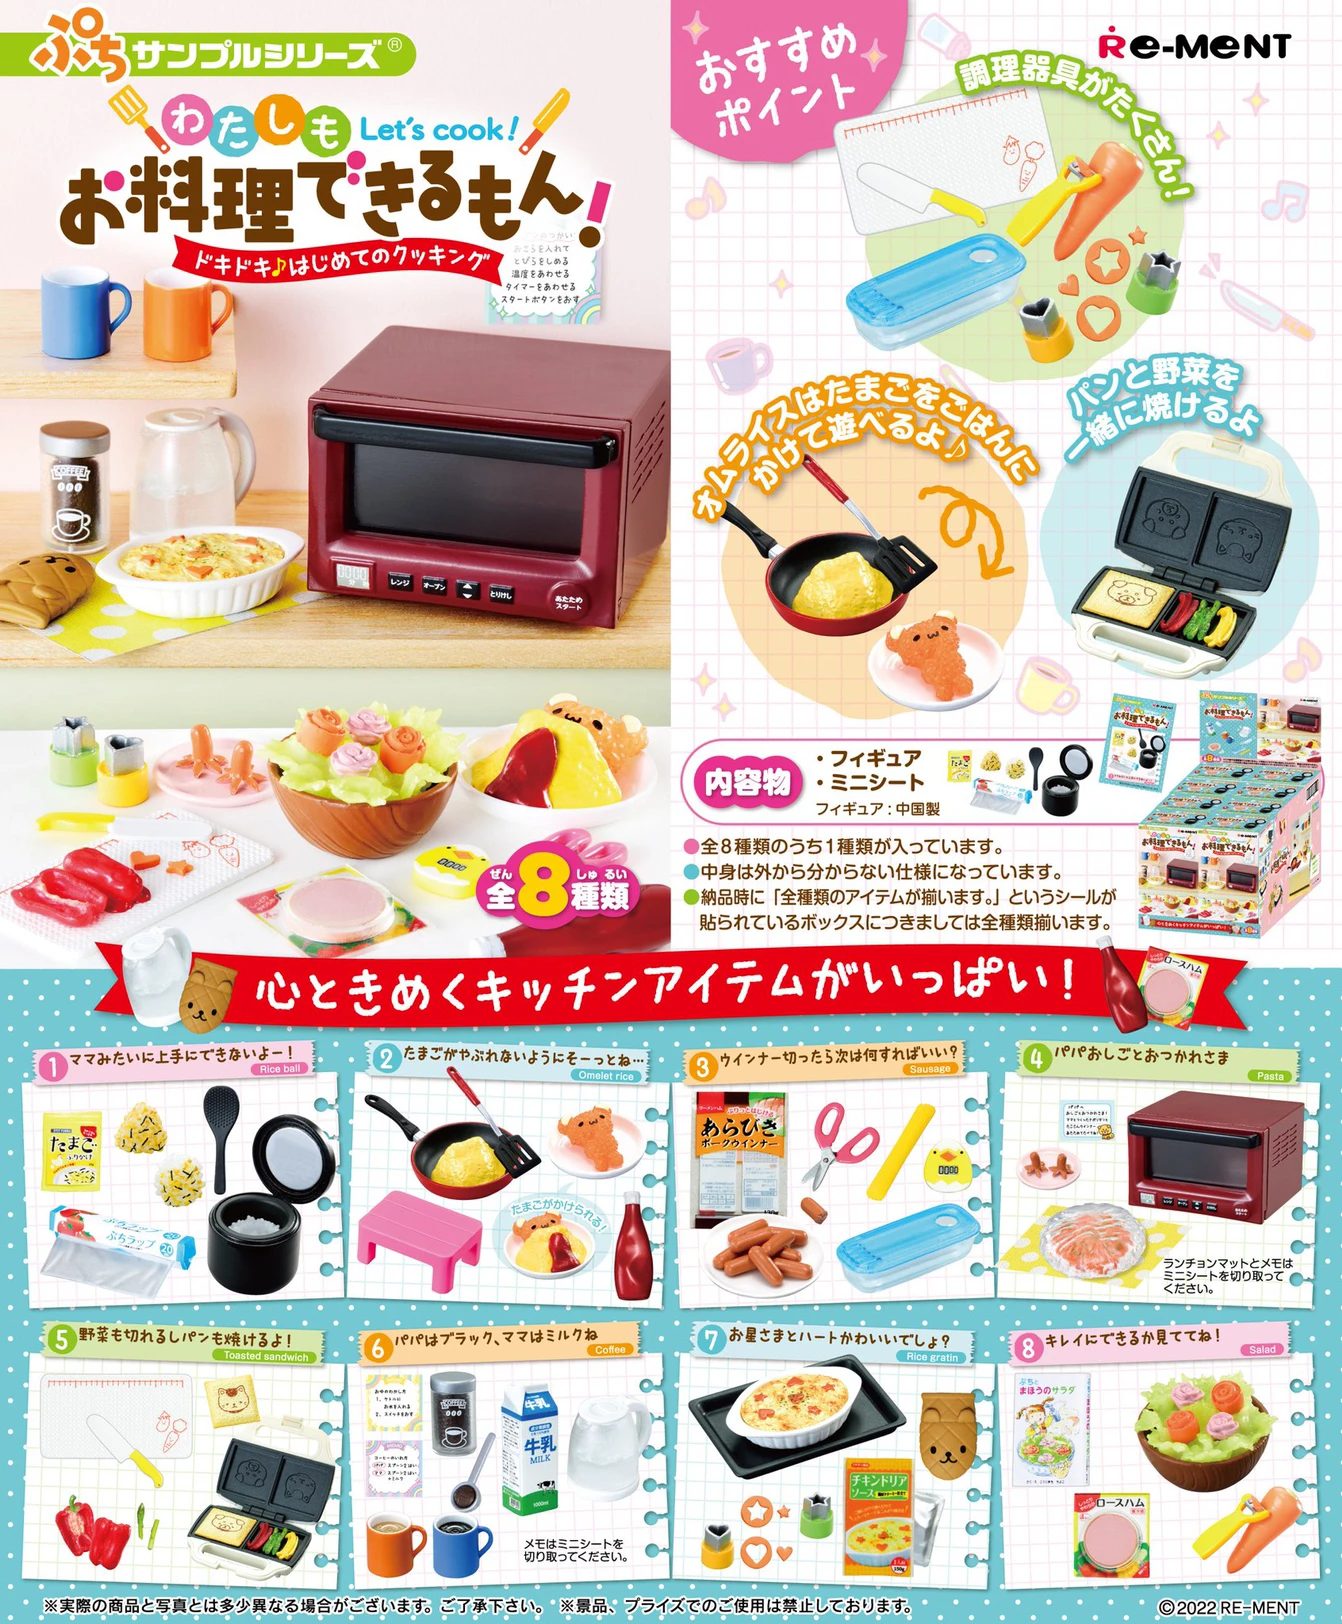 

Re-ment Miniature Home Cooking Kitchen Cooking Utensils and Delicacies Boxed Capsule Gashapon Toy Figure Accessories